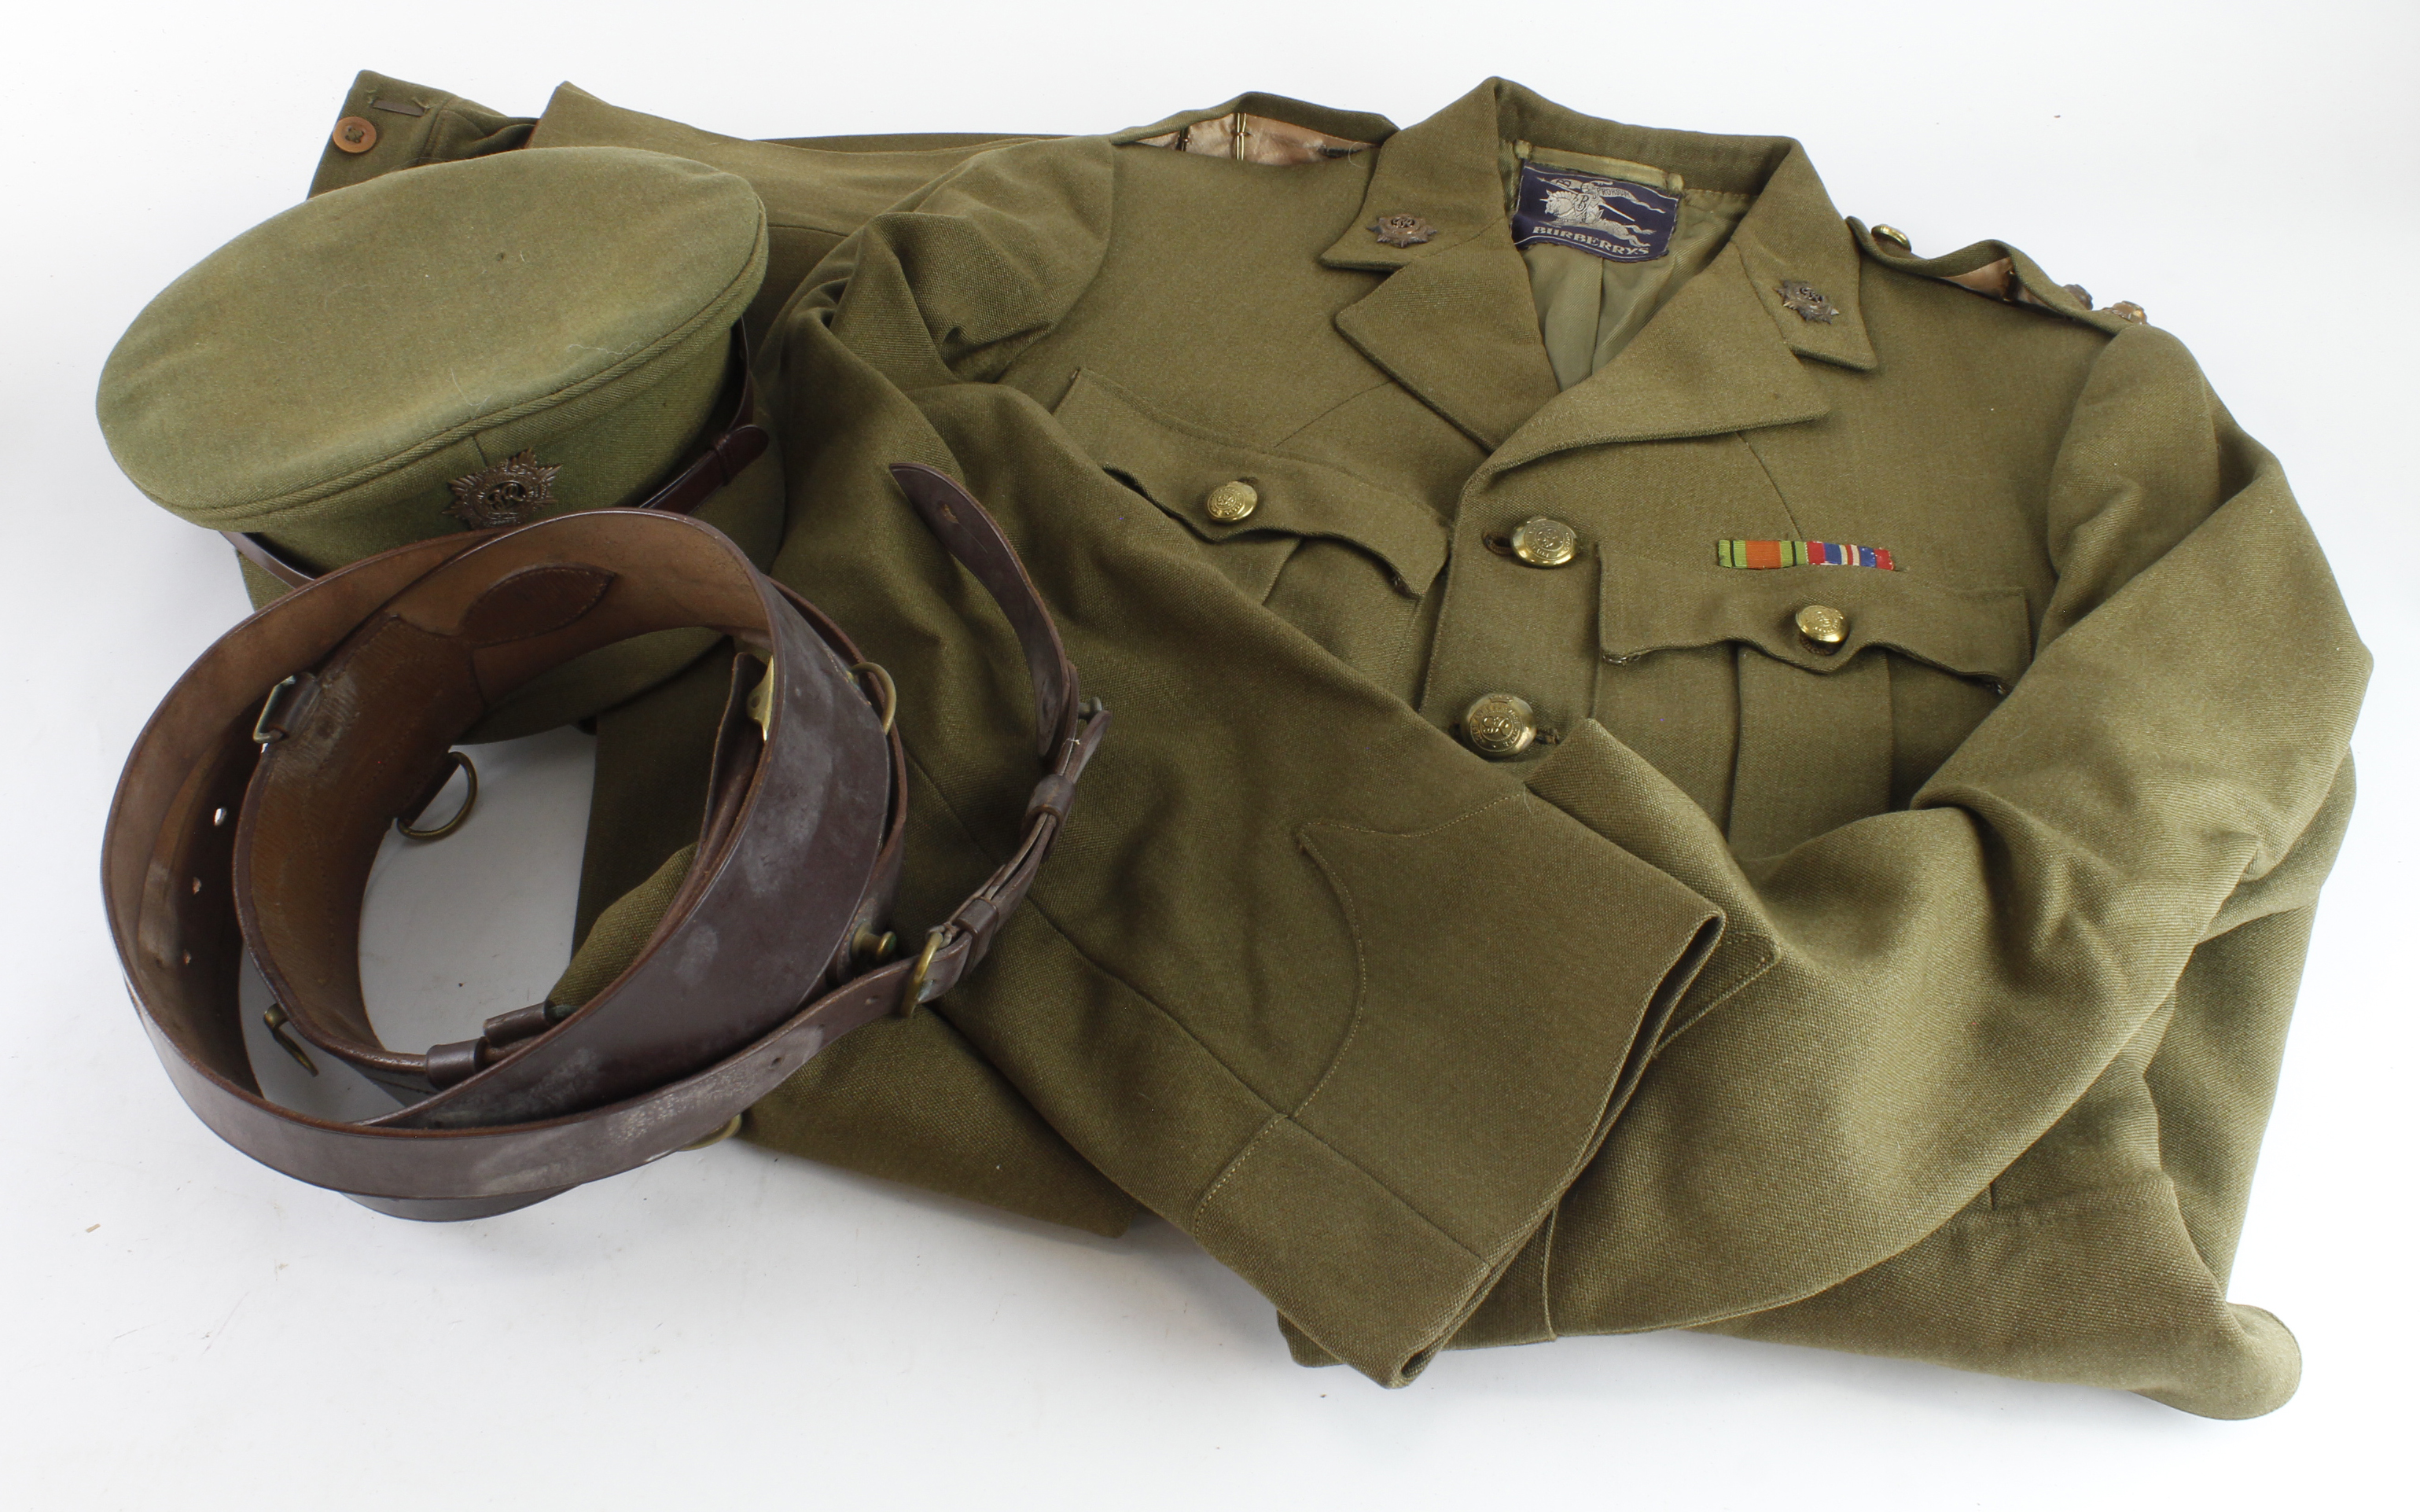 RASC Lieut uniform with Kings crown buttons and collar badges complete with jacket hat riding